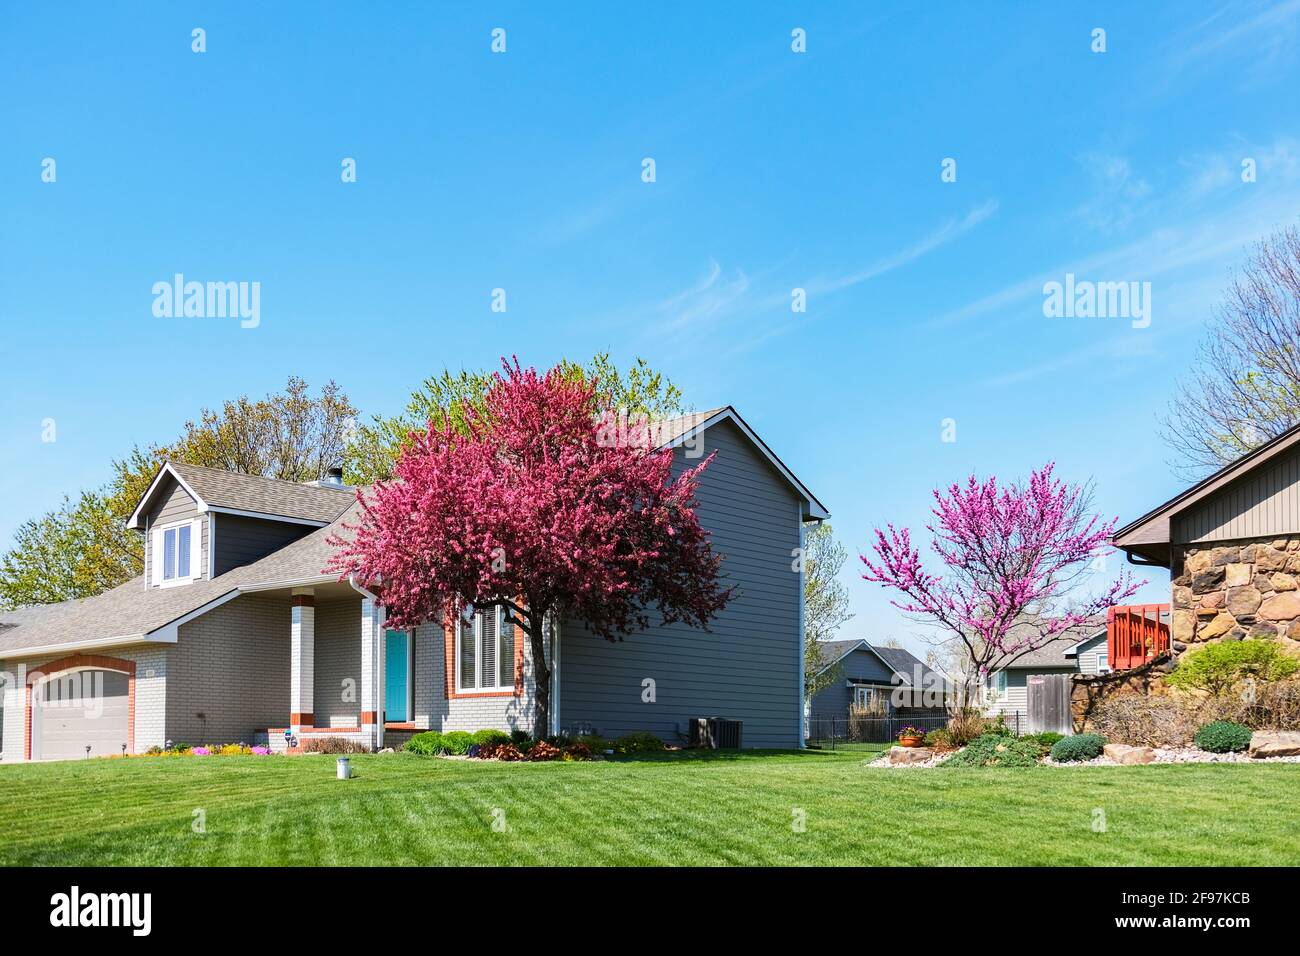 Flowering crabapple tree, Malus Prairiefire or Malus Prairifire, in front of a house with green lawn and blue sky. Stock Photo